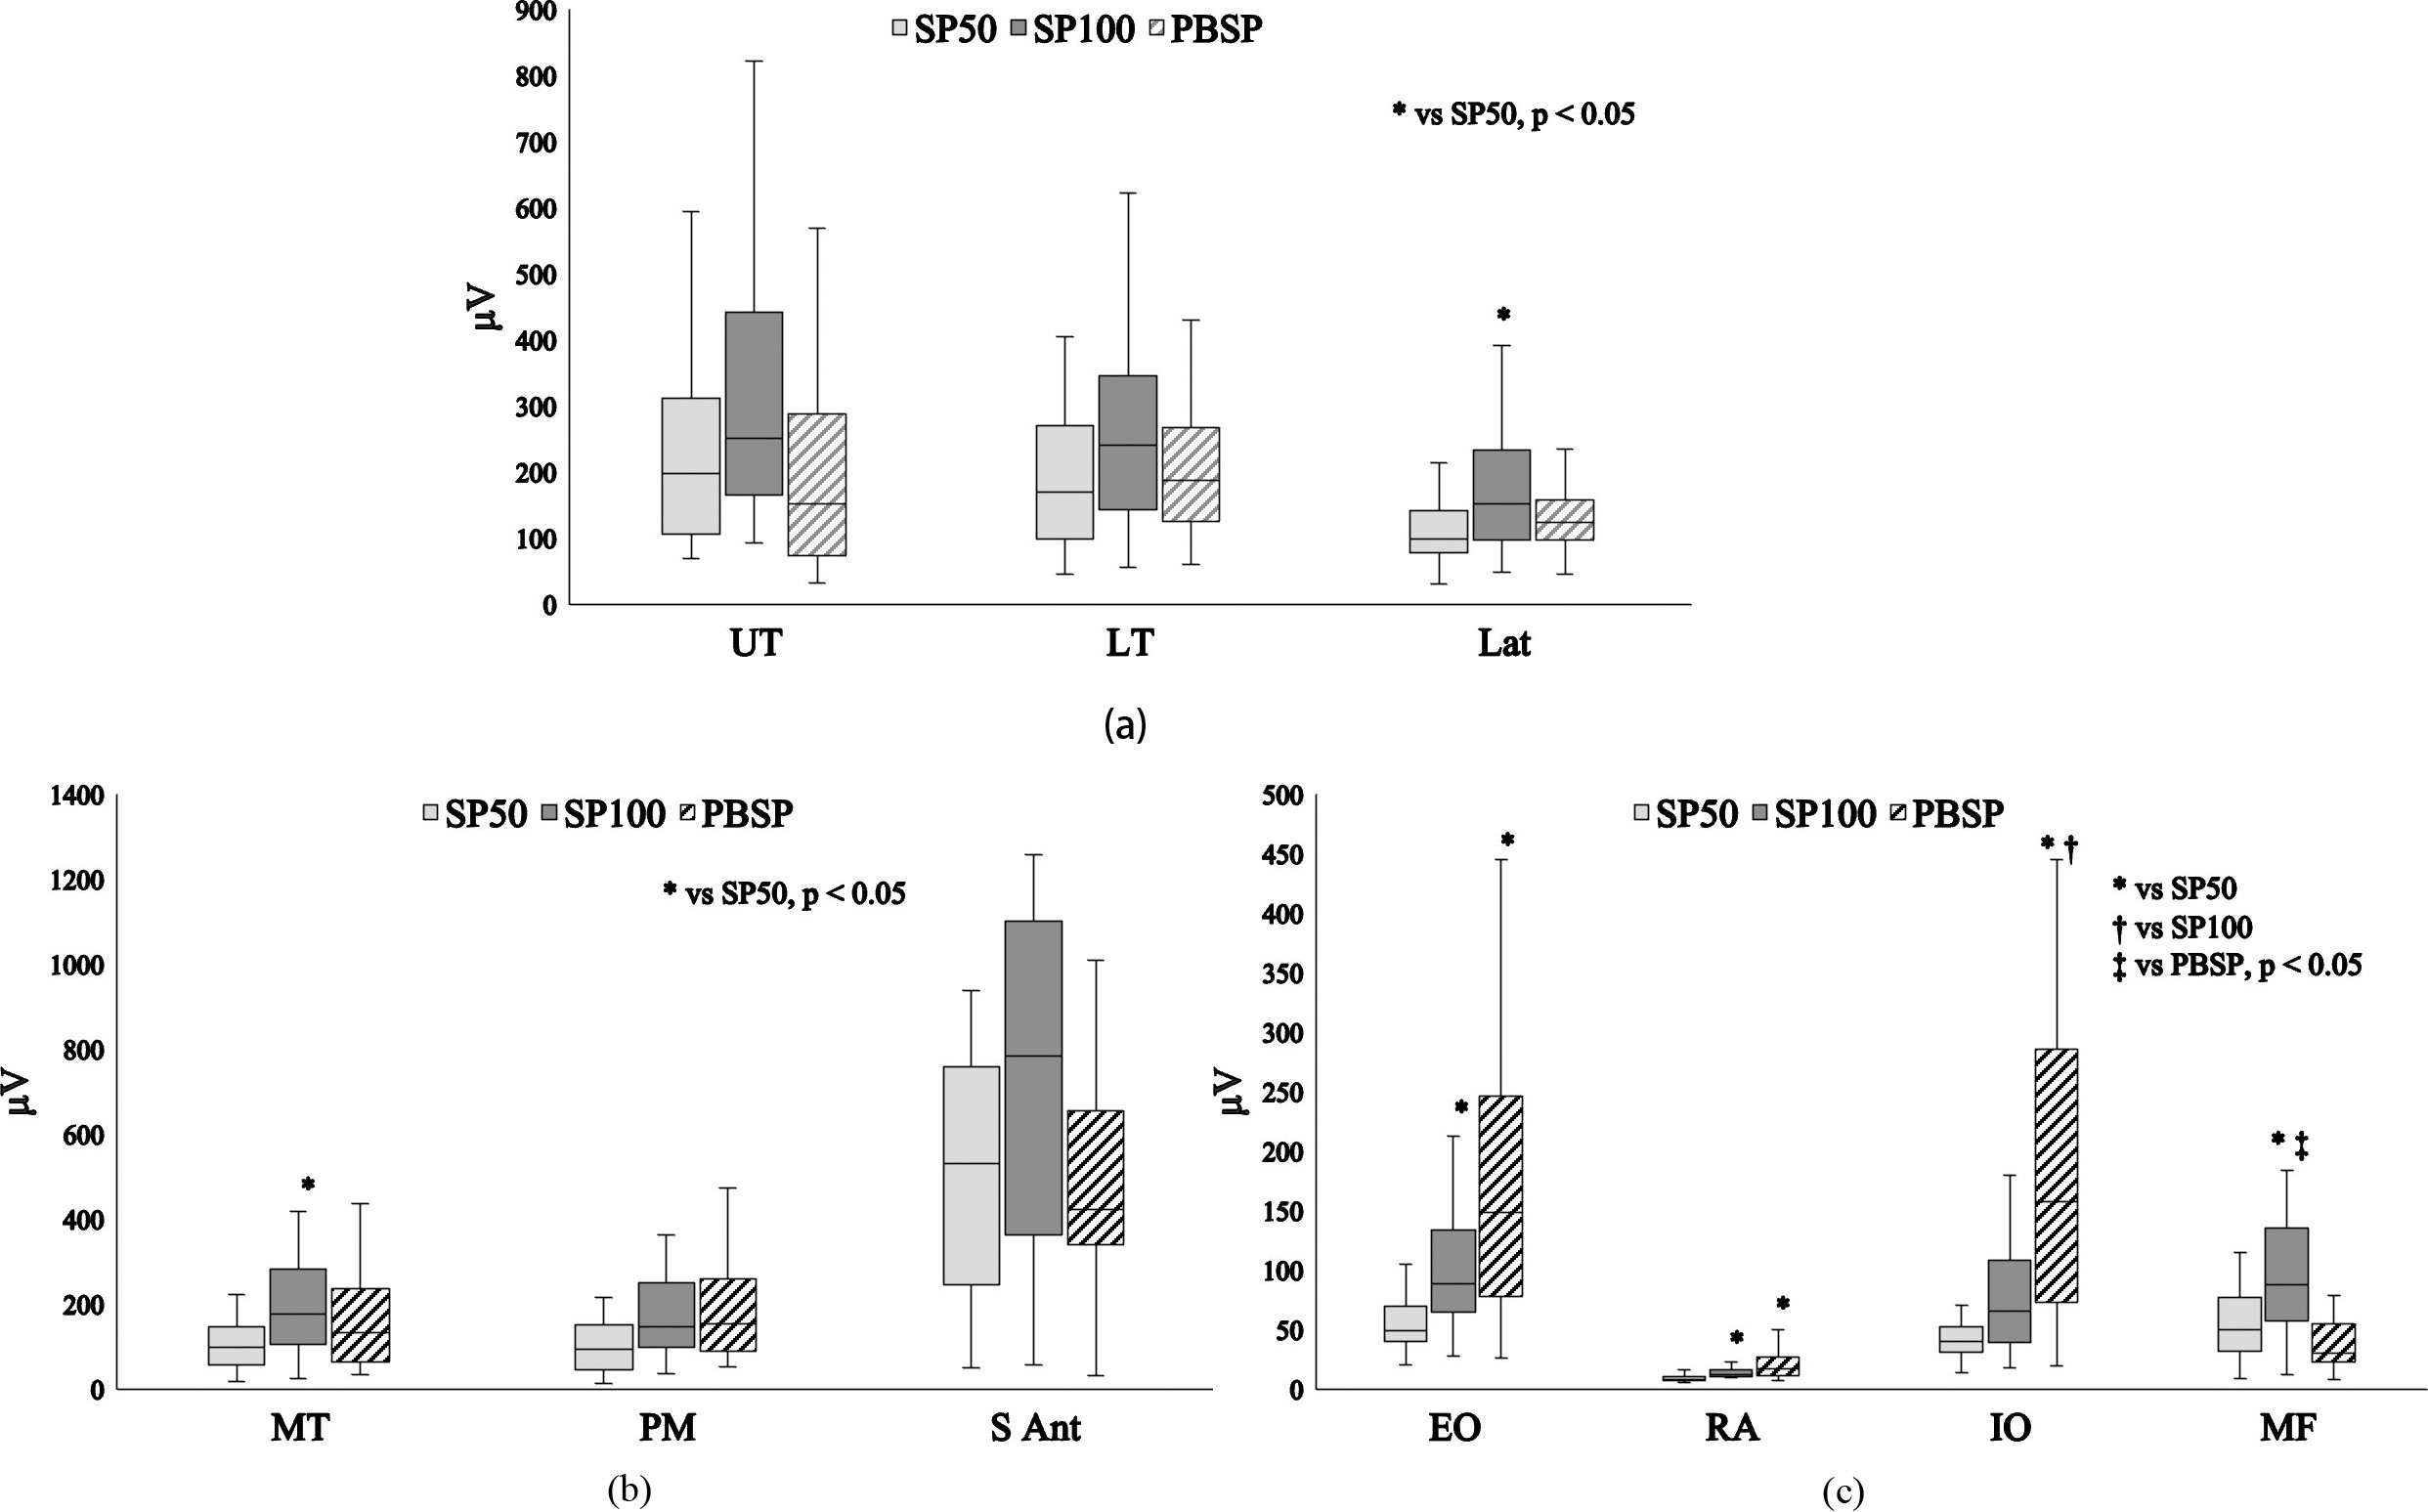 a. Differences in muscle activity between exercise tasks in the scapulothoracic muscles in shoulder press upward. PBSP paper balloon shoulder press; SP50, shoulder press 50%; SP100, shoulder press 100%. UT, upper trapezius; LT, lower trapezius; Lat, latissimus dorsi. b. Differences in muscle activity between exercise tasks in the scapulohumeral muscles in shoulder press upward. PBSP paper balloon shoulder press; SP50, shoulder press 50%; SP100, shoulder press 100%; MT, medial head of the triceps brachii; PM, clavicular part of the pectoralis major; S Ant, serratus anterior. c. Differences in muscle activity between exercise tasks in trunk muscles in shoulder press upward. PBSP paper balloon shoulder press; SP50, shoulder press 50%; SP100, shoulder press 100%; EO, external oblique; RA, rectus abdominis; IO, internal oblique; MF, multifidus. 